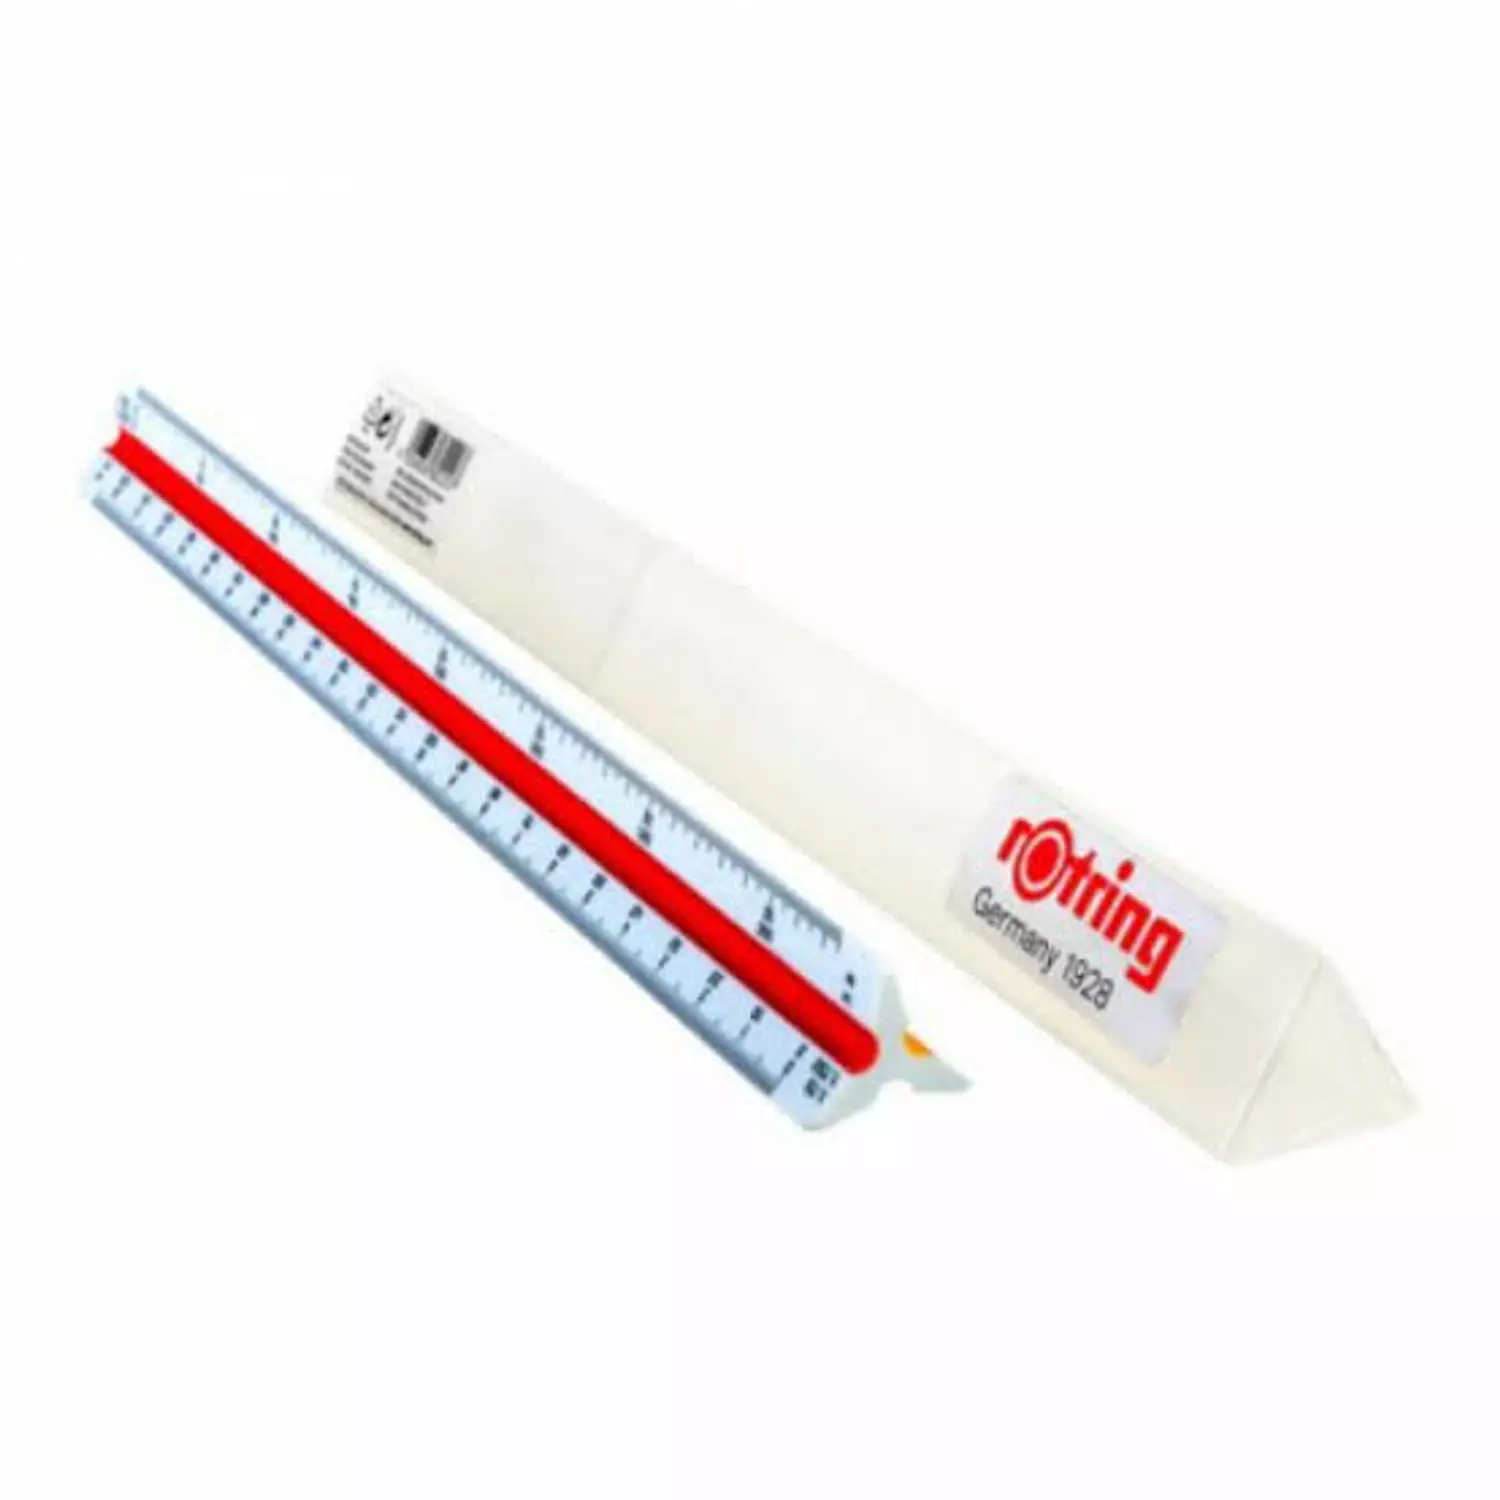 Rotring metric scale